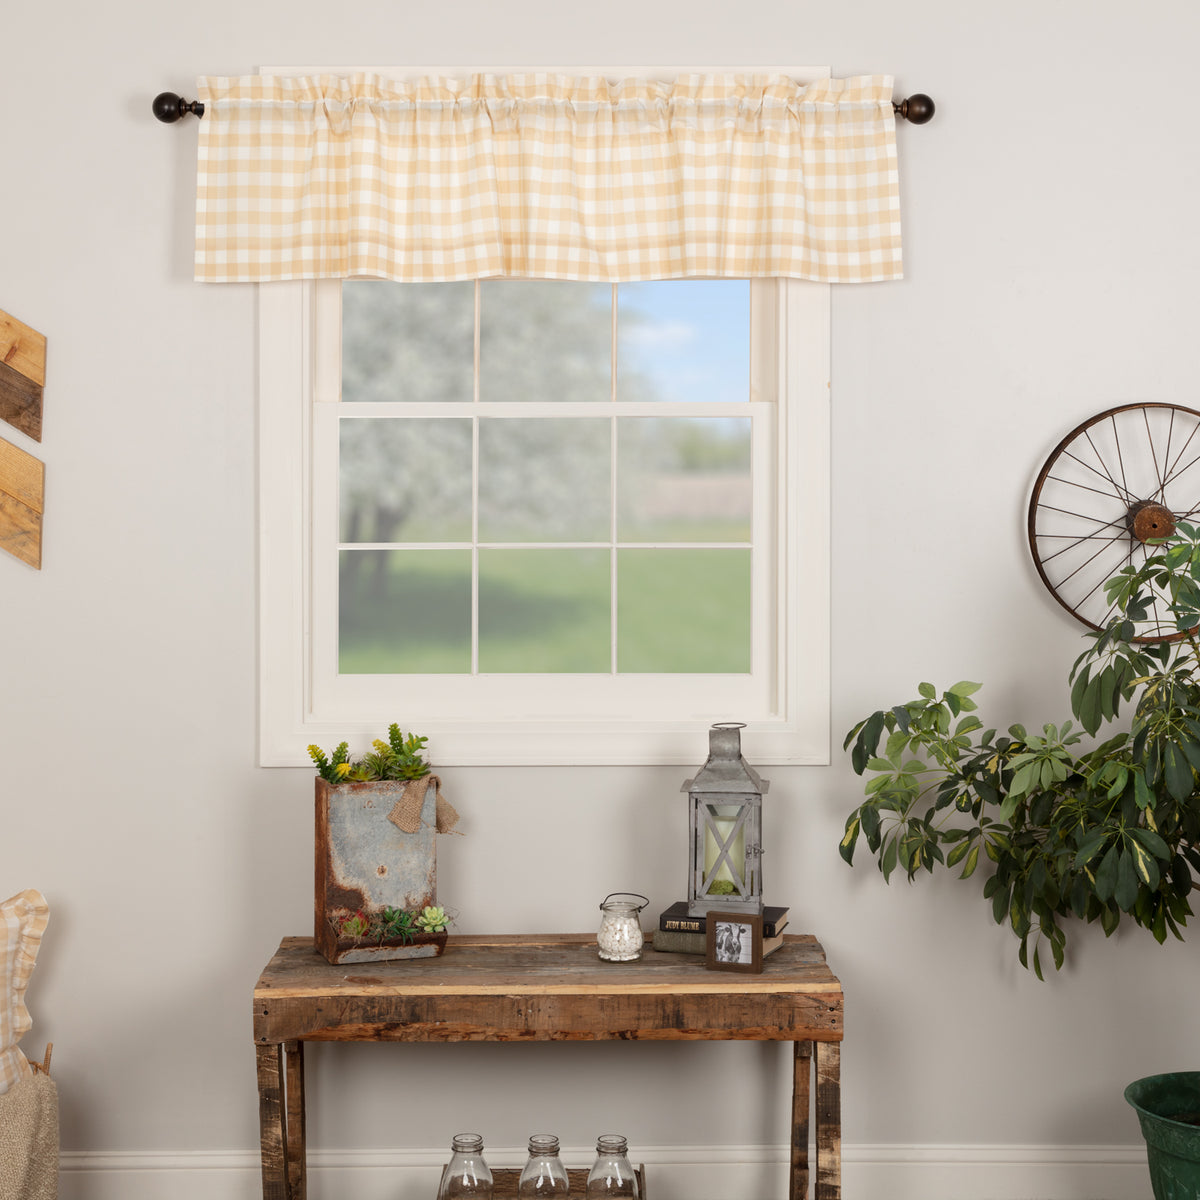 April & Olive Annie Buffalo Tan Check Valance 16x72 By VHC Brands